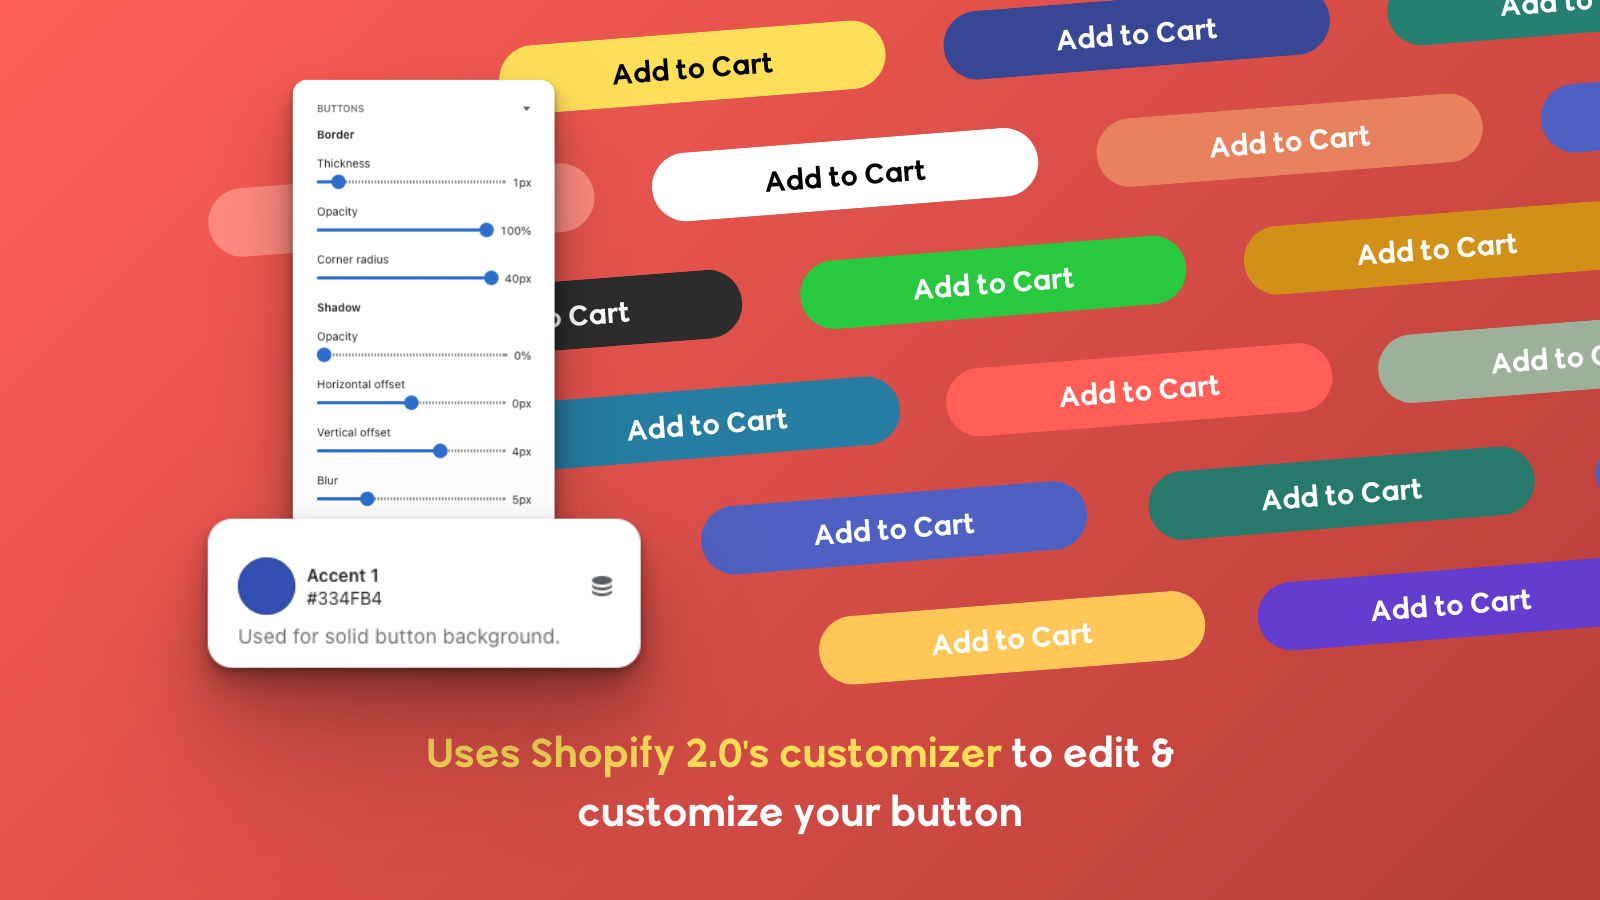 Uses Shopify's 2.0 customizer to edit and customize ATC button